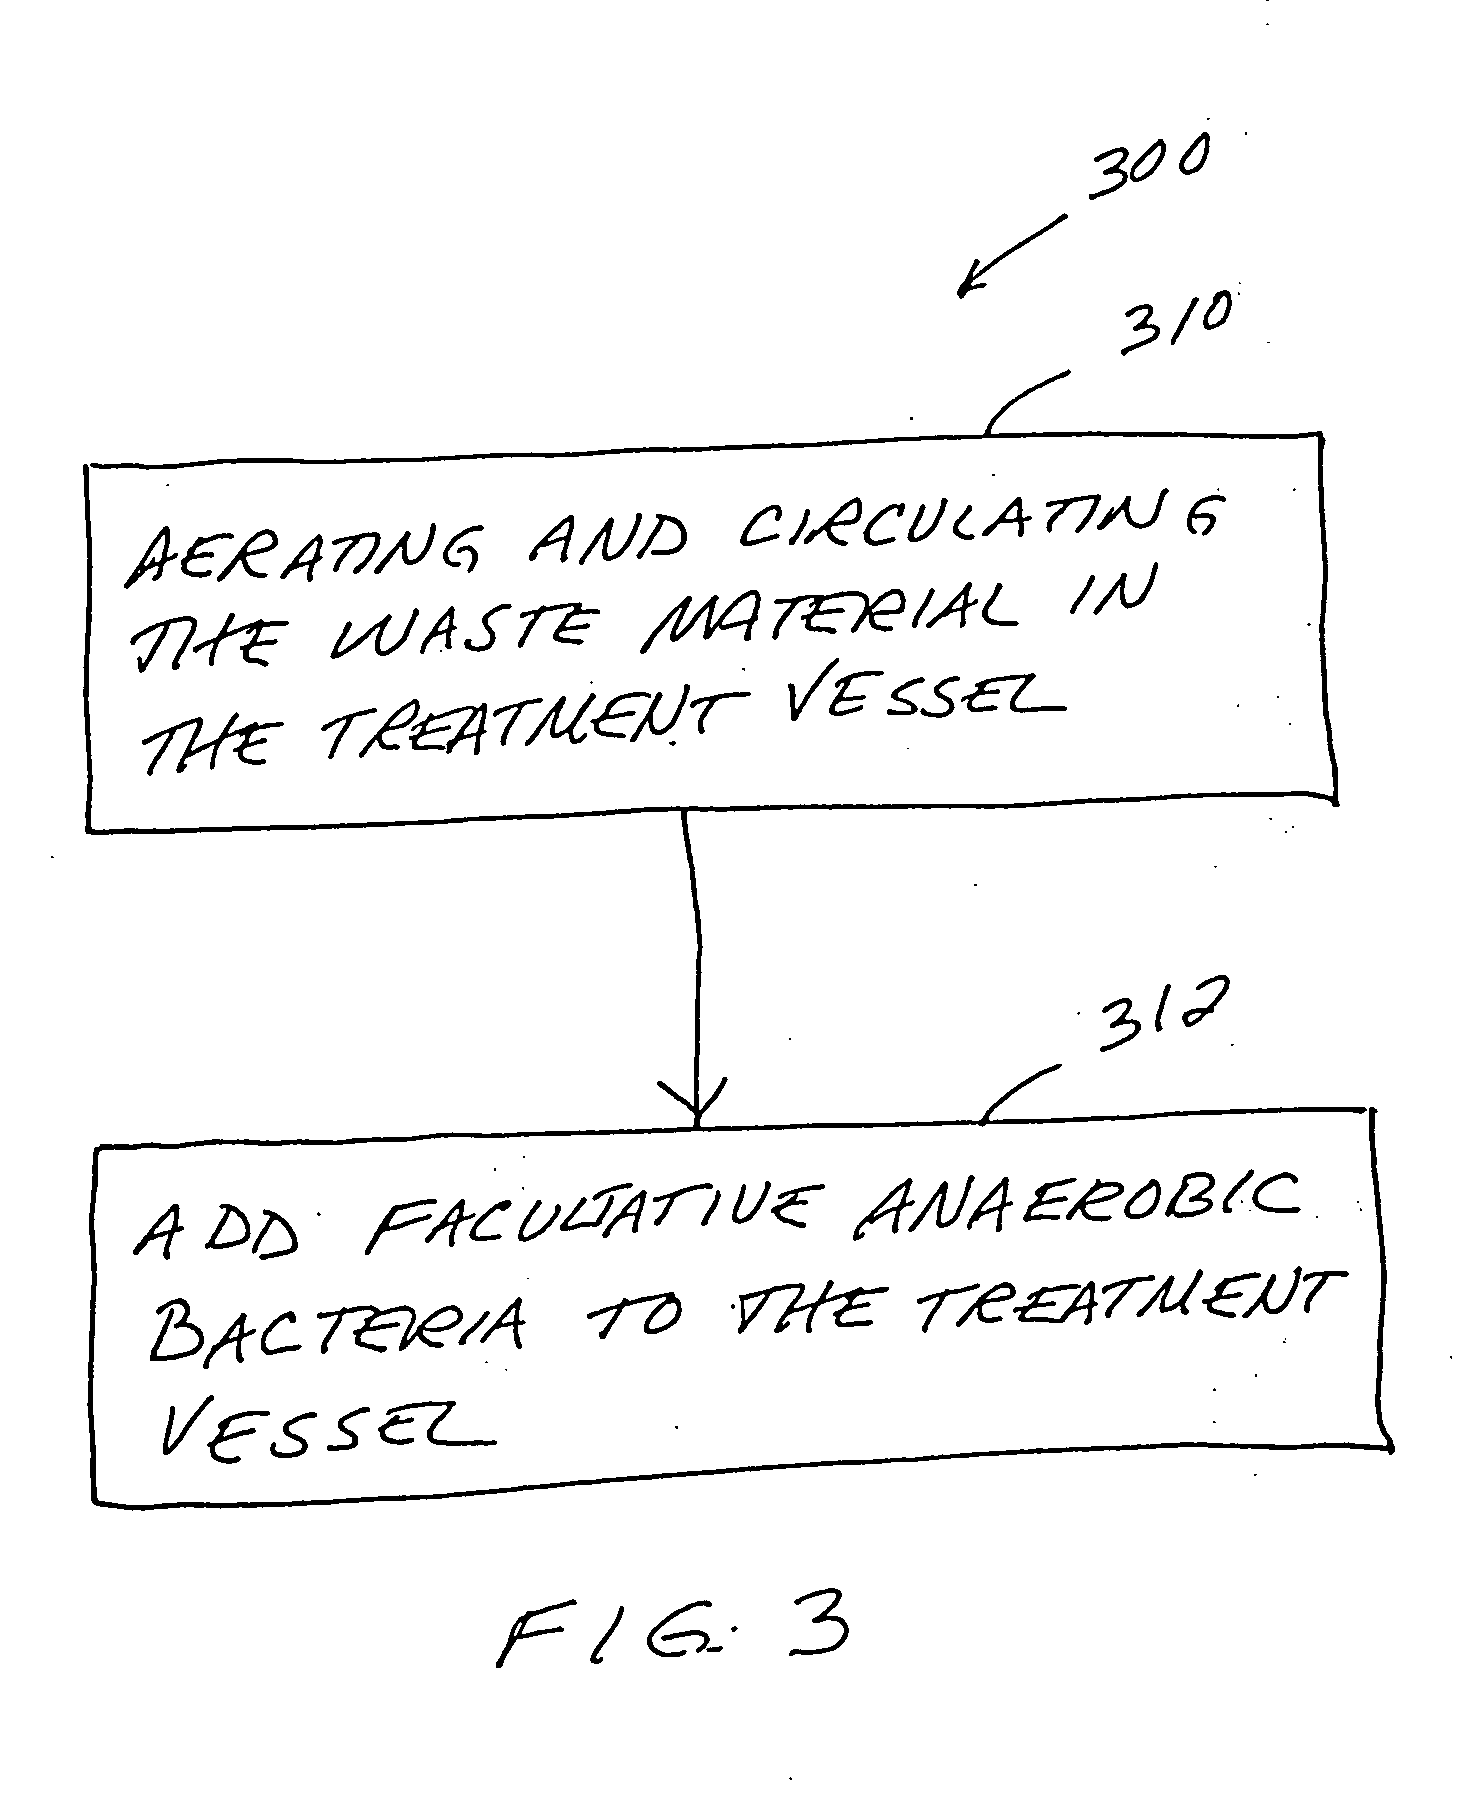 Method for recovering a disposal trench with a biomat slime, and method for operating a waste treatment vessel